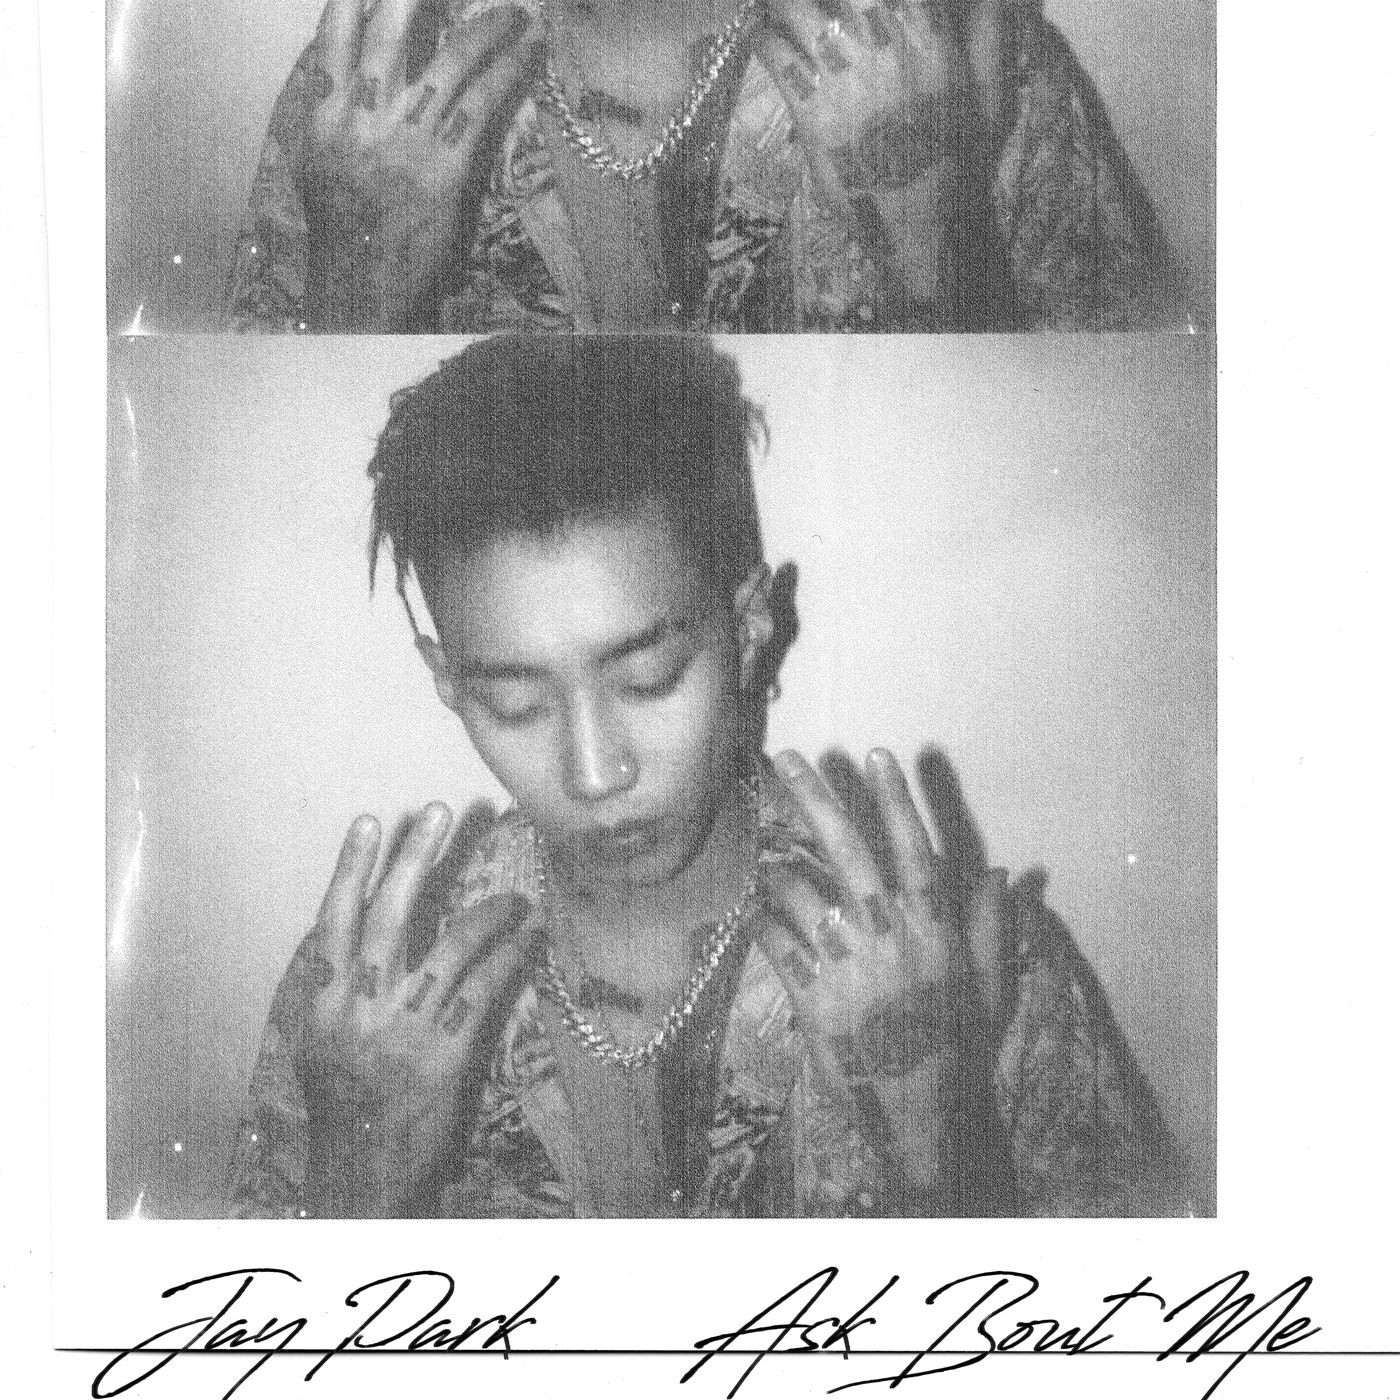 Jay Park (박재범) – Ask Bout Me [FLAC + MP3 320 / WEB] [2018.07.20]